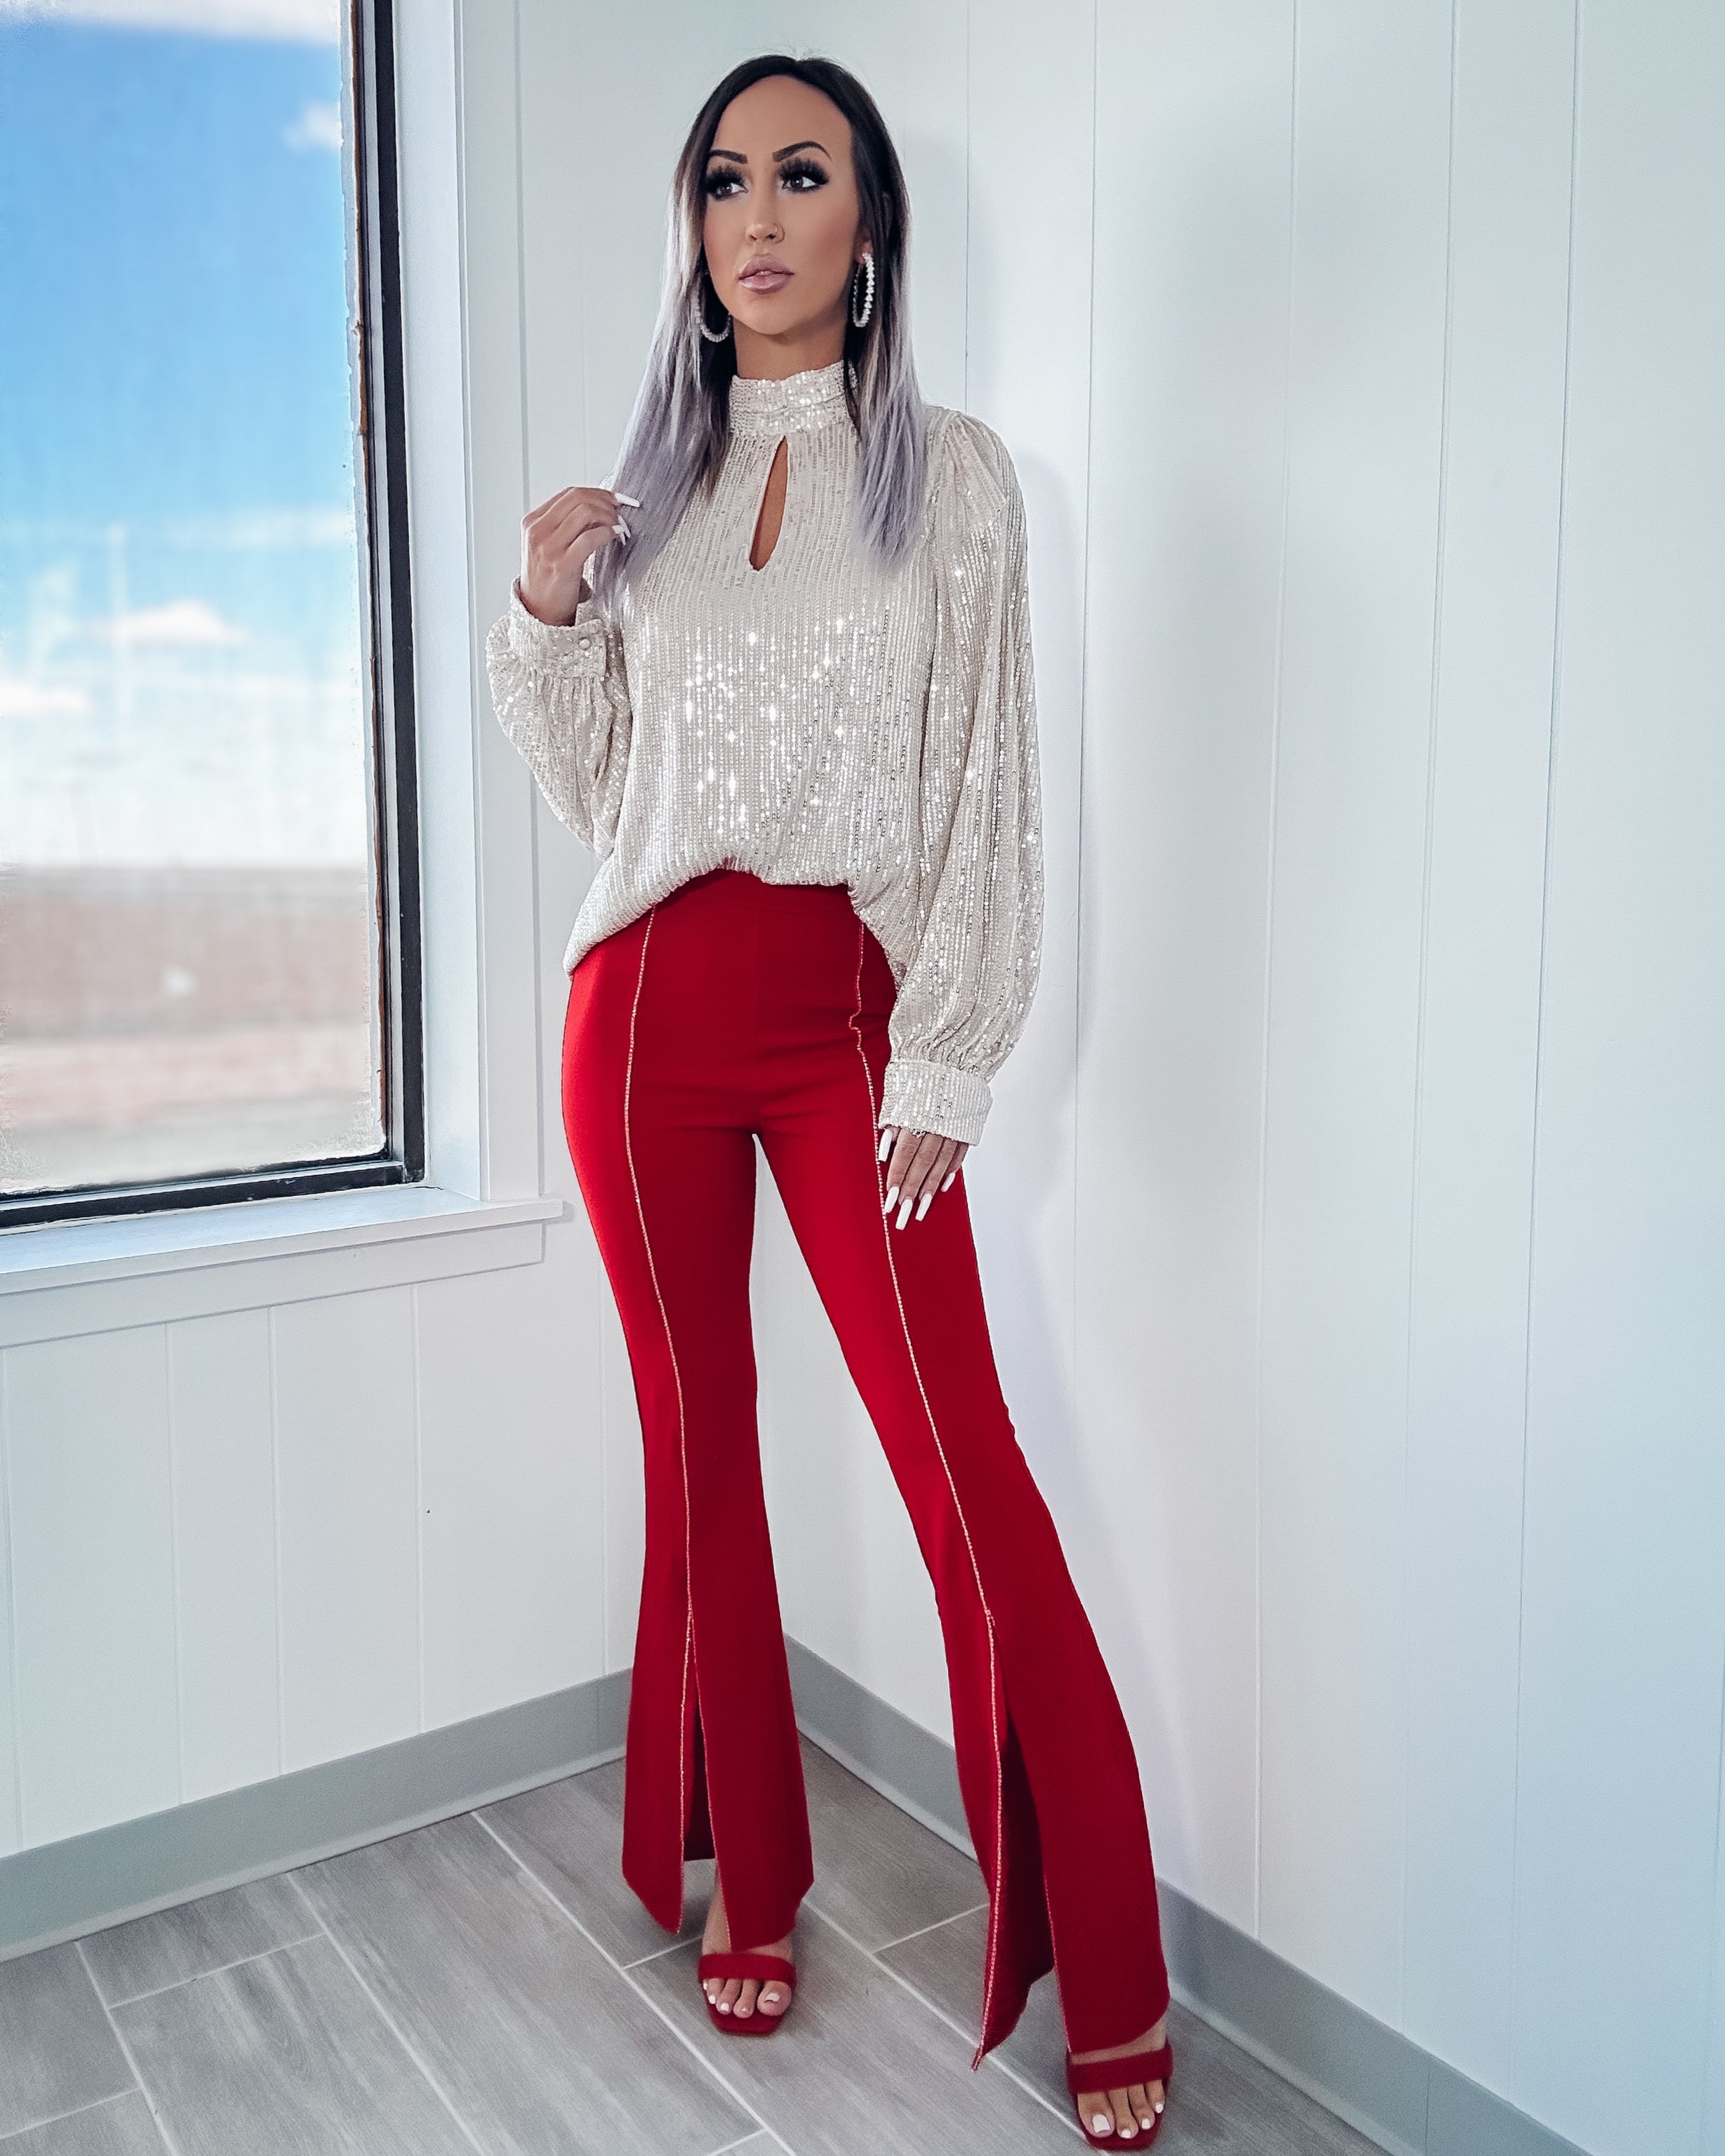 Living In The Moment Rhinestone Slit Pants - Red